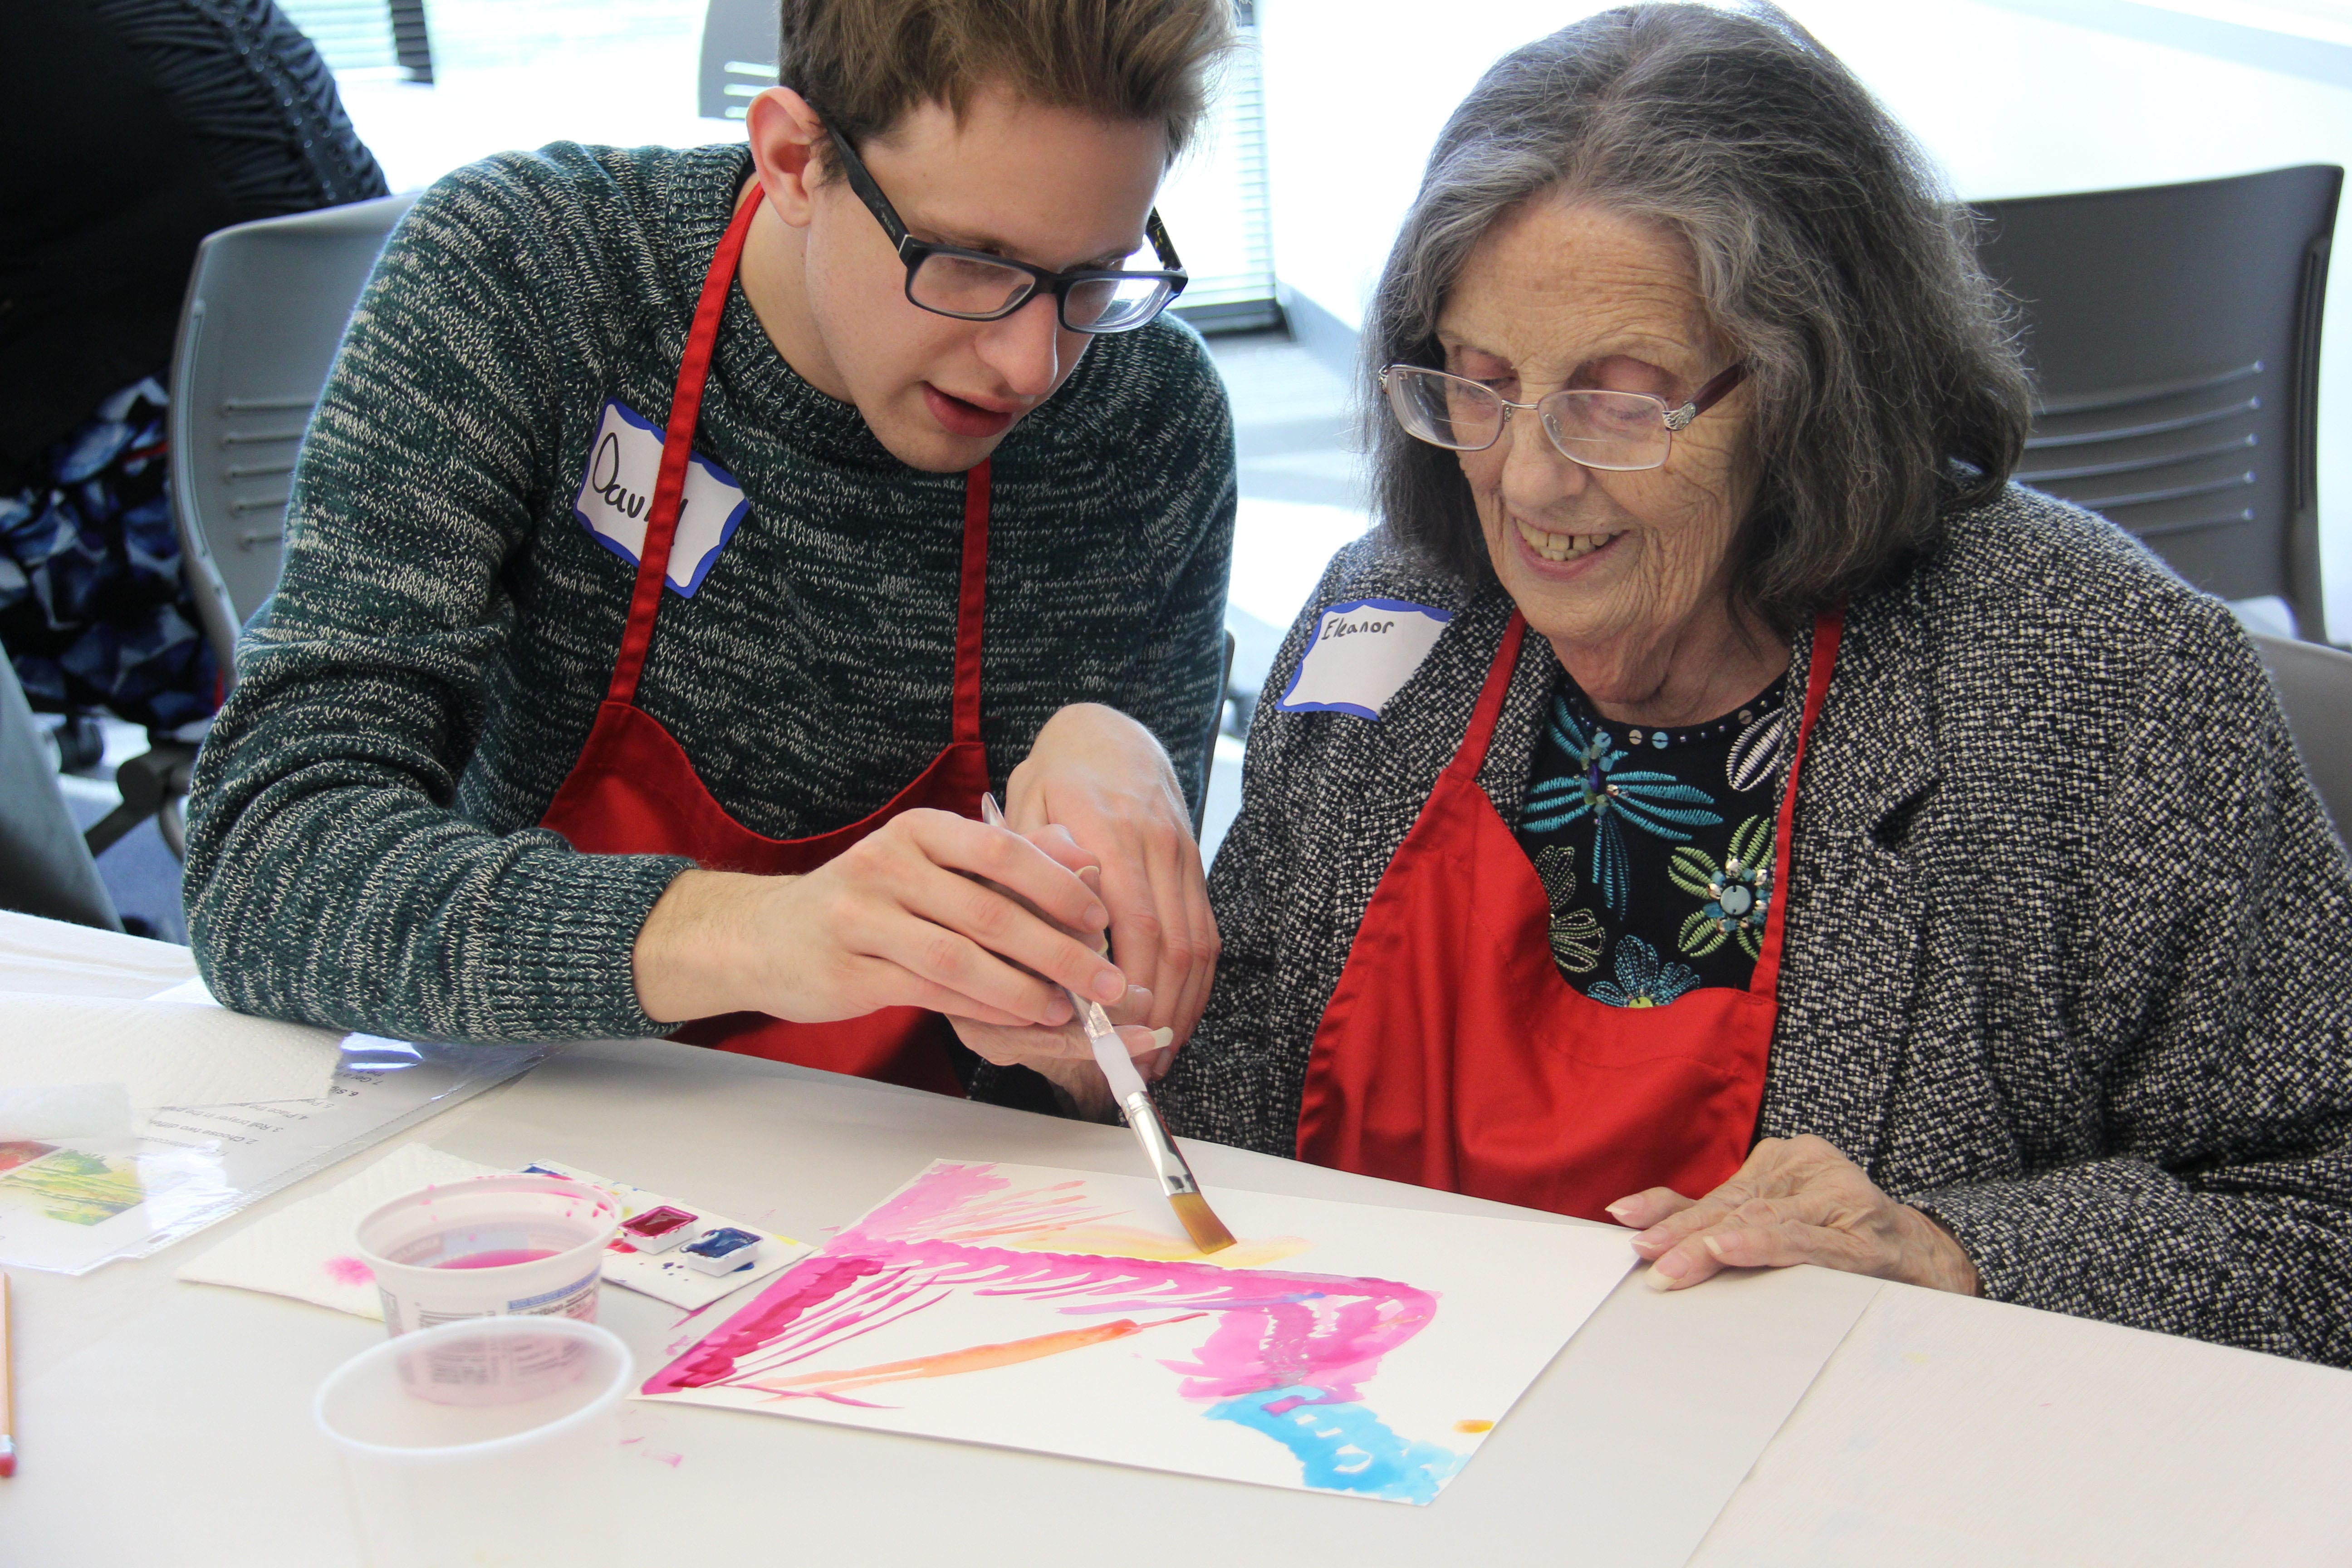 occupational therapy student helping patient with an art project